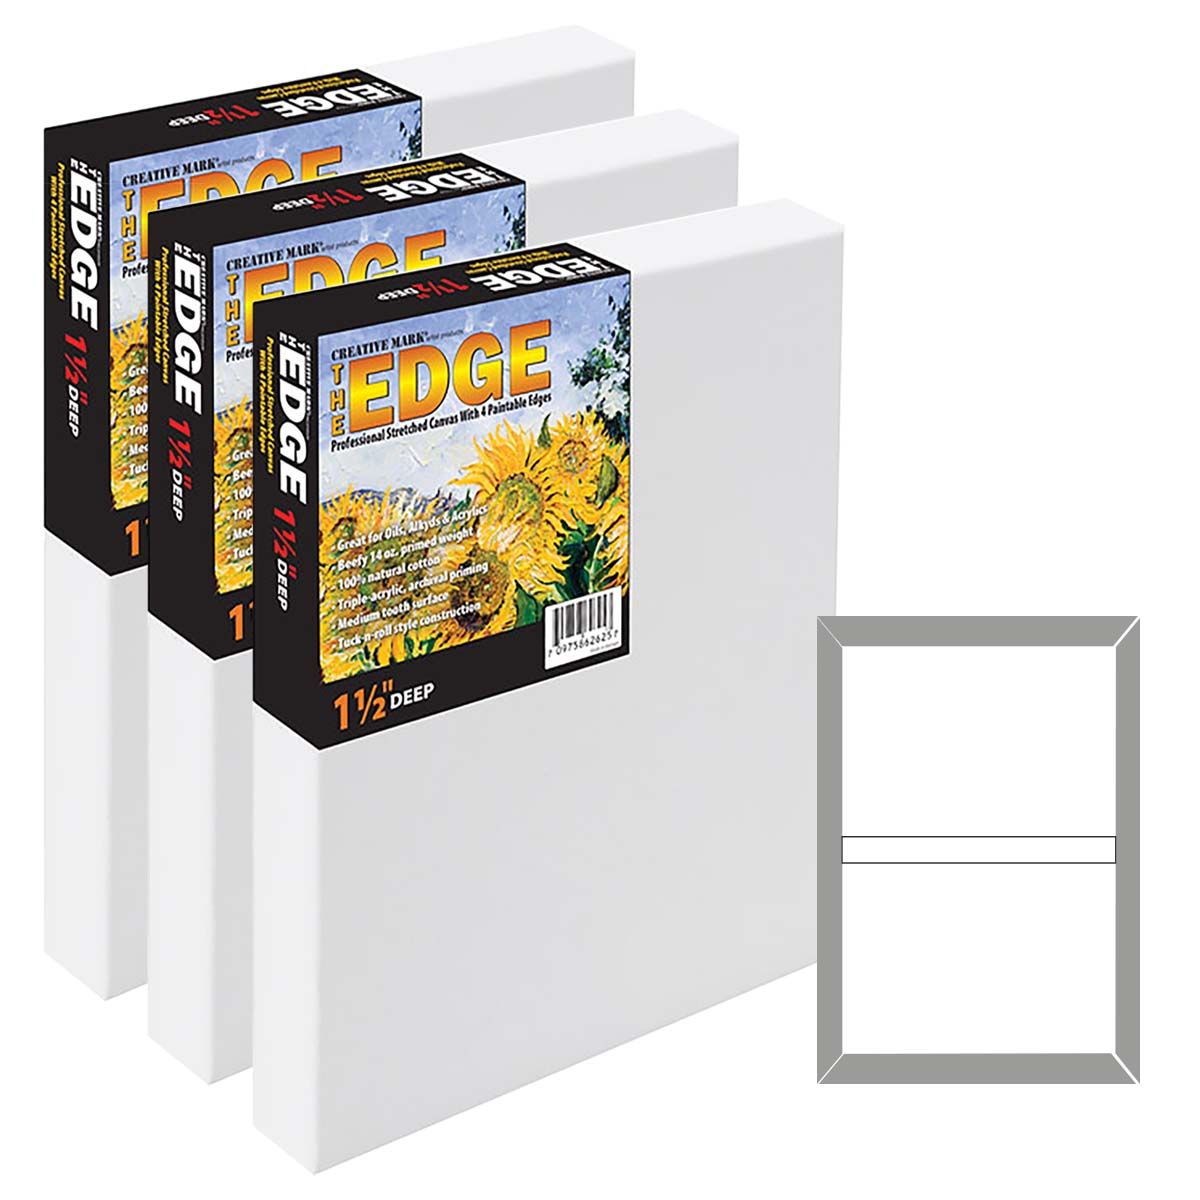 4 Packs: 6 ct. (24 total) 14 x 14 Super Value Pack Canvas by